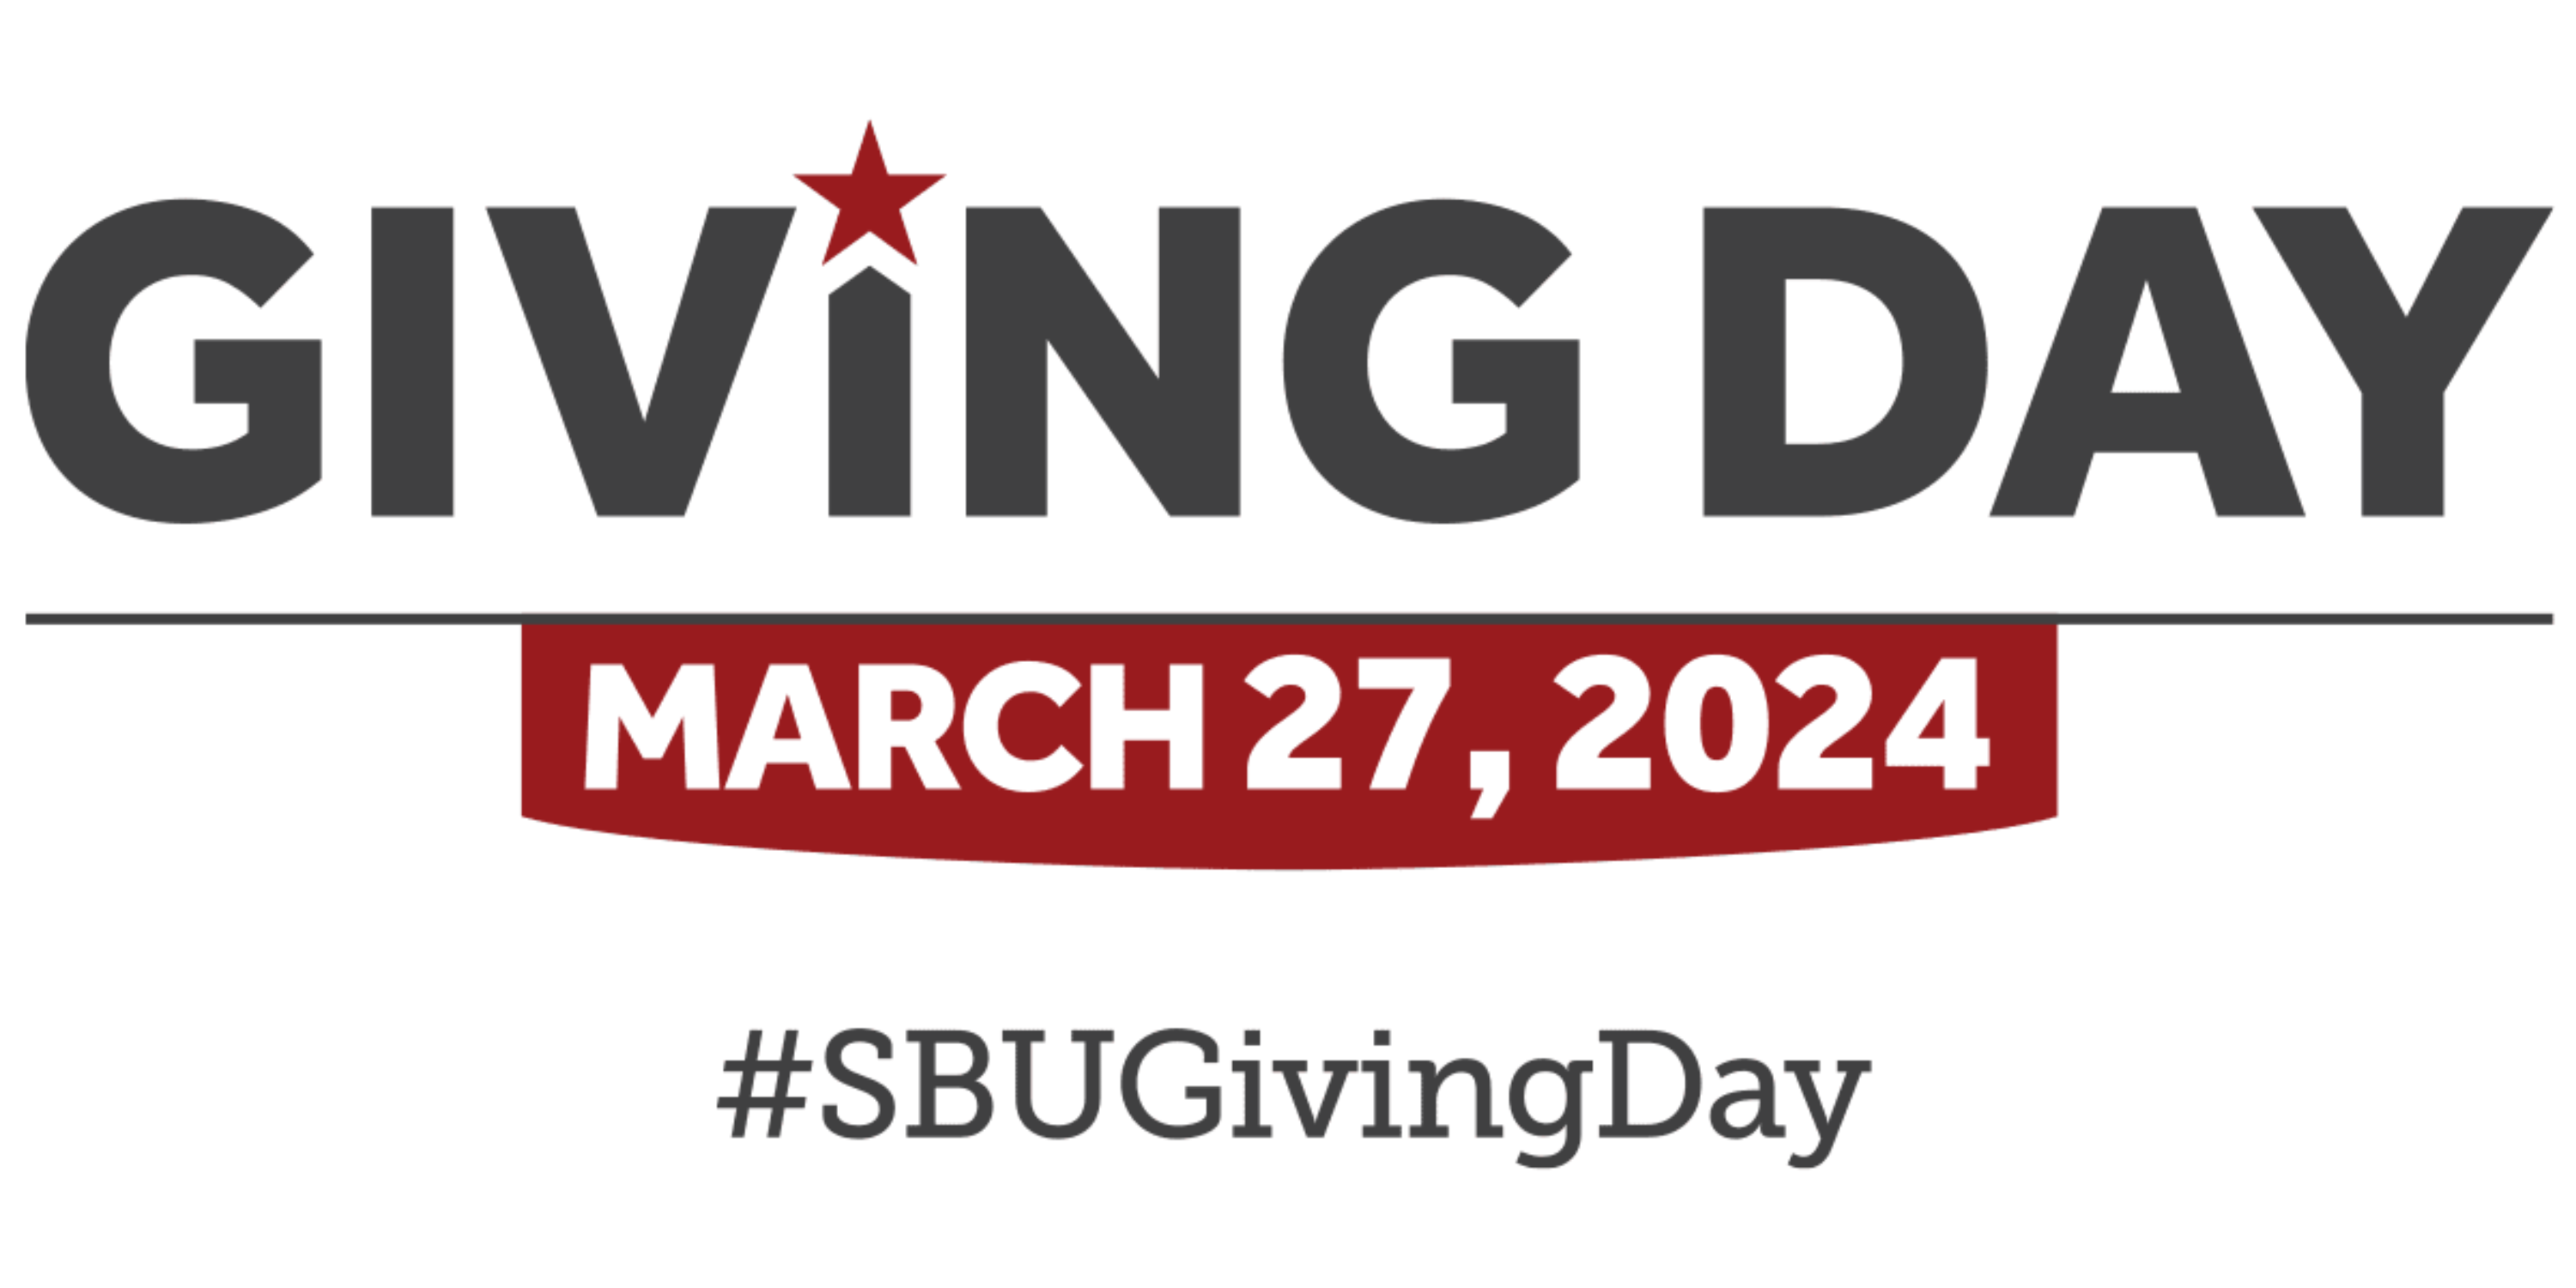 Giving Day Logo: March 27, 2024